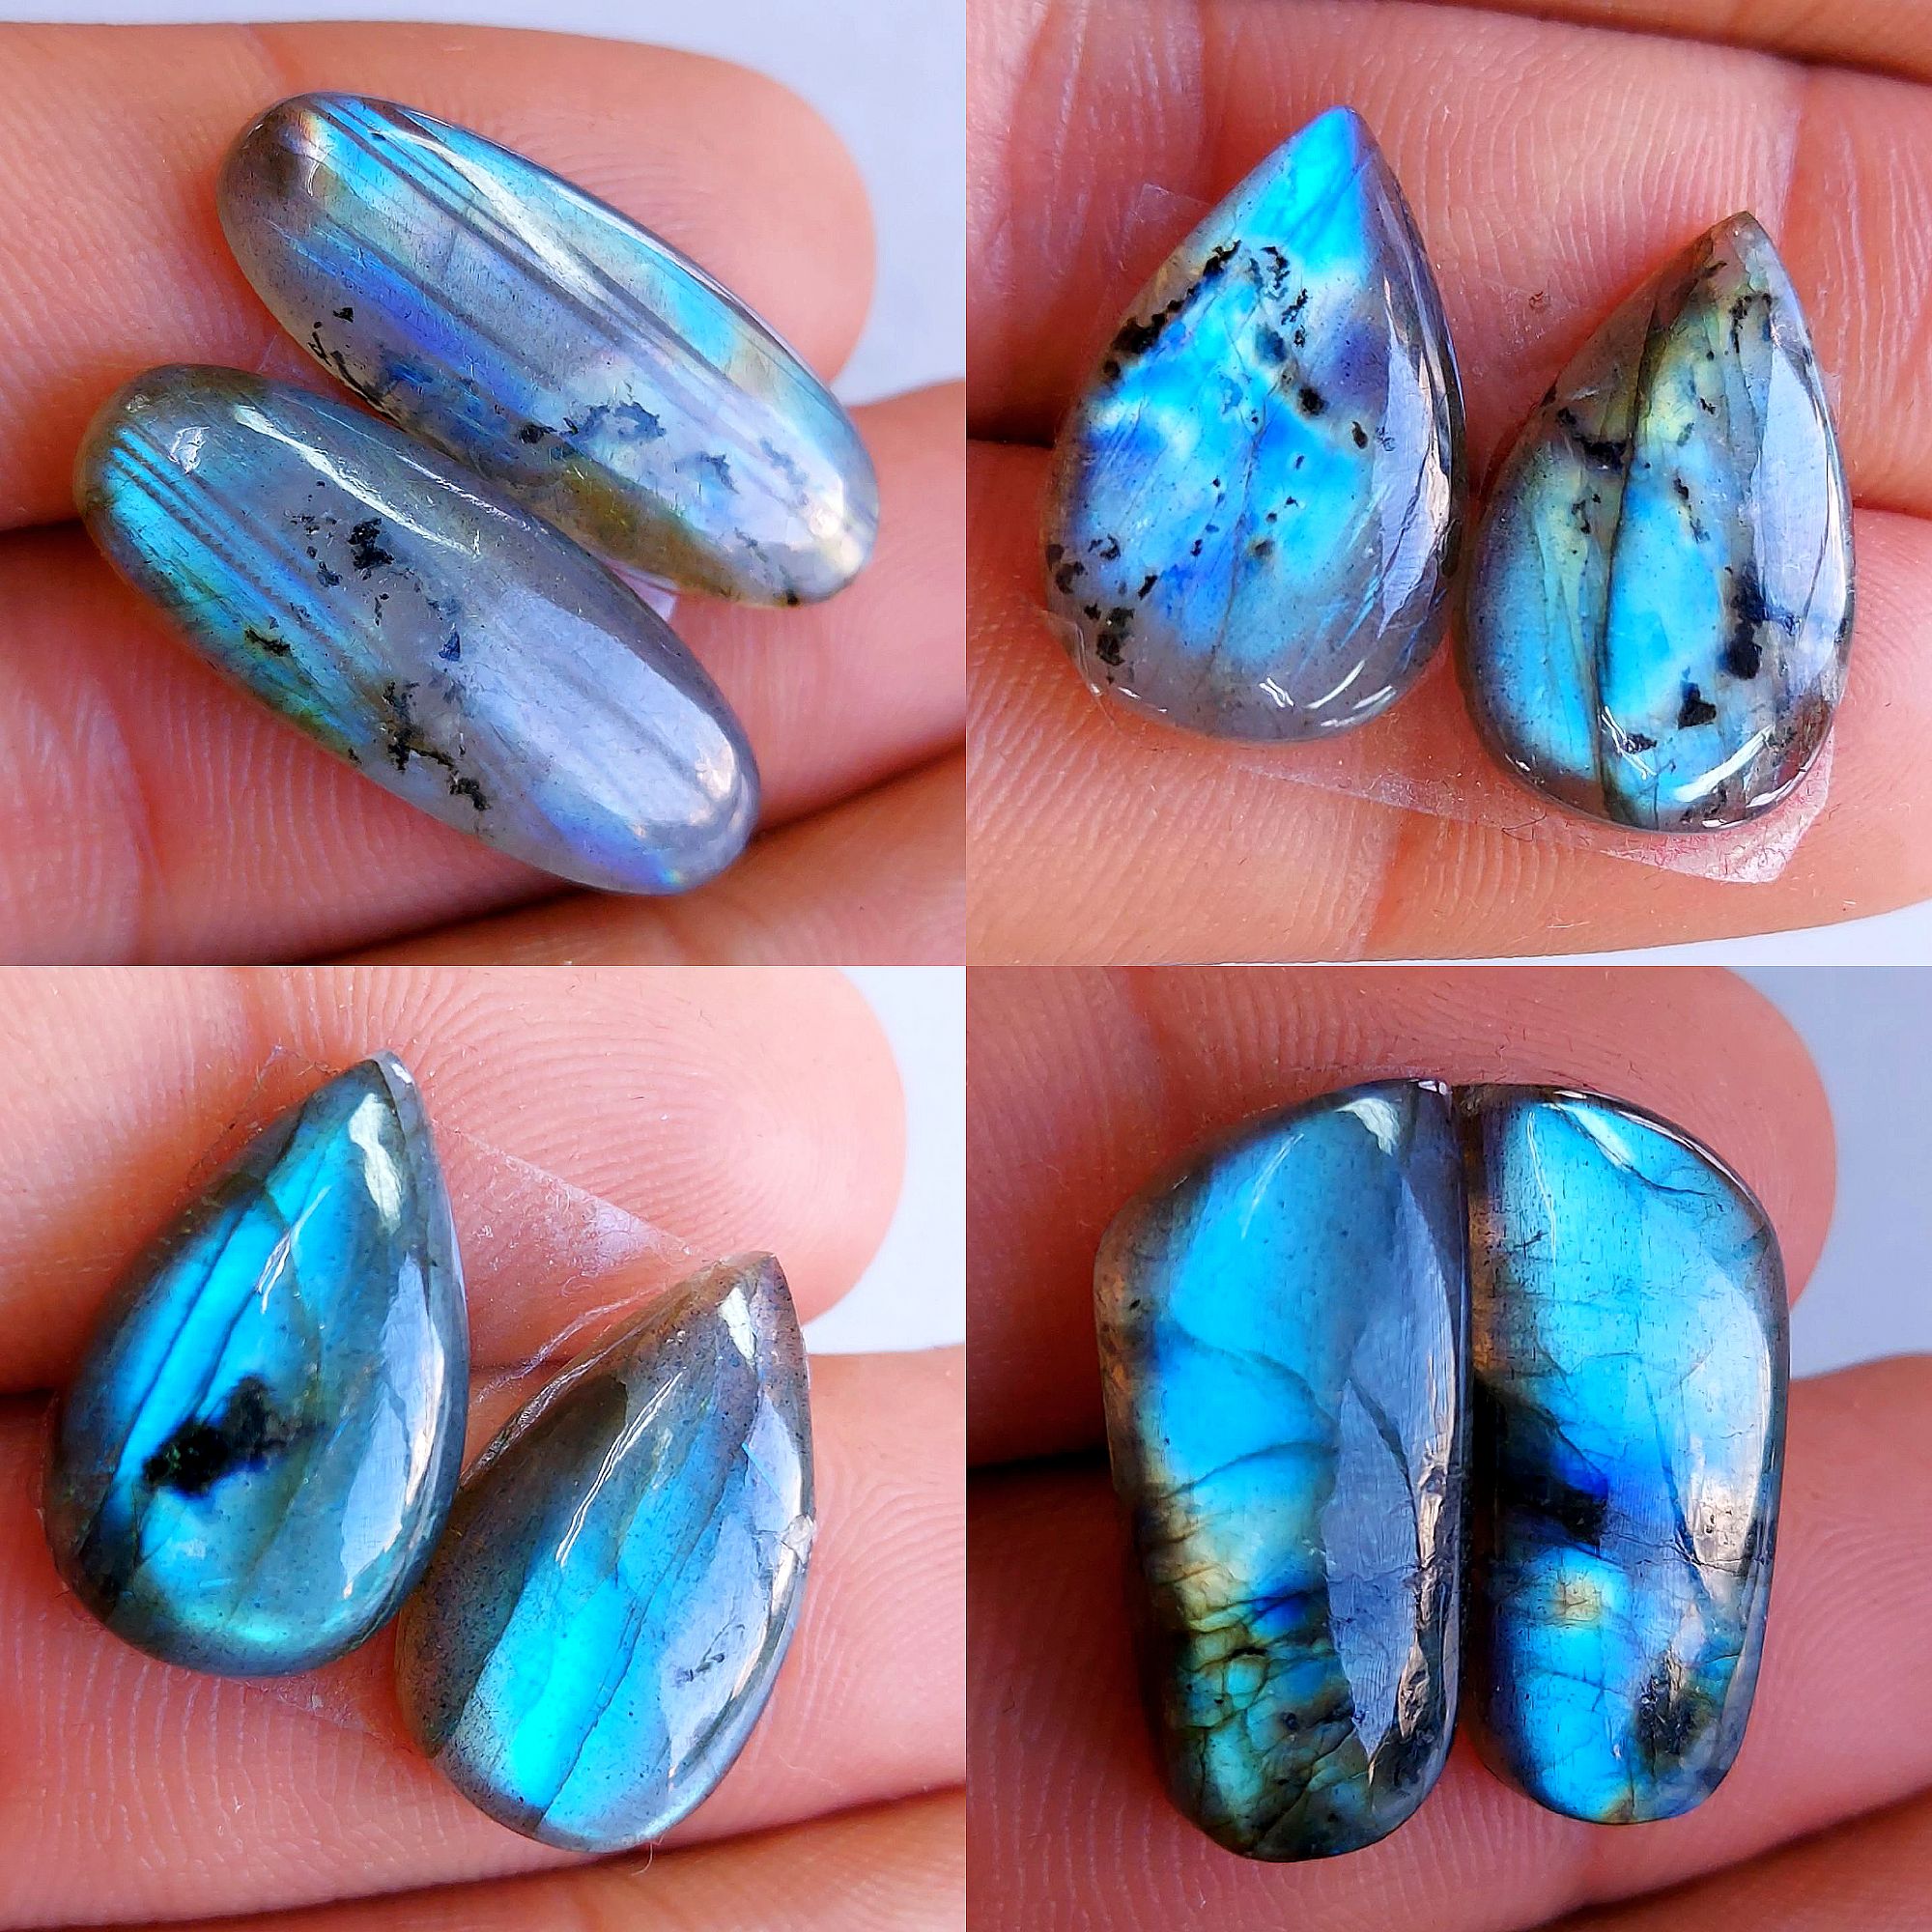 4 Pairs lot 103Cts Natural Labradorite cabochon pair lot for jewelry making loose gemstone lot mix shape and size earring pairs 26x8 18x10mm